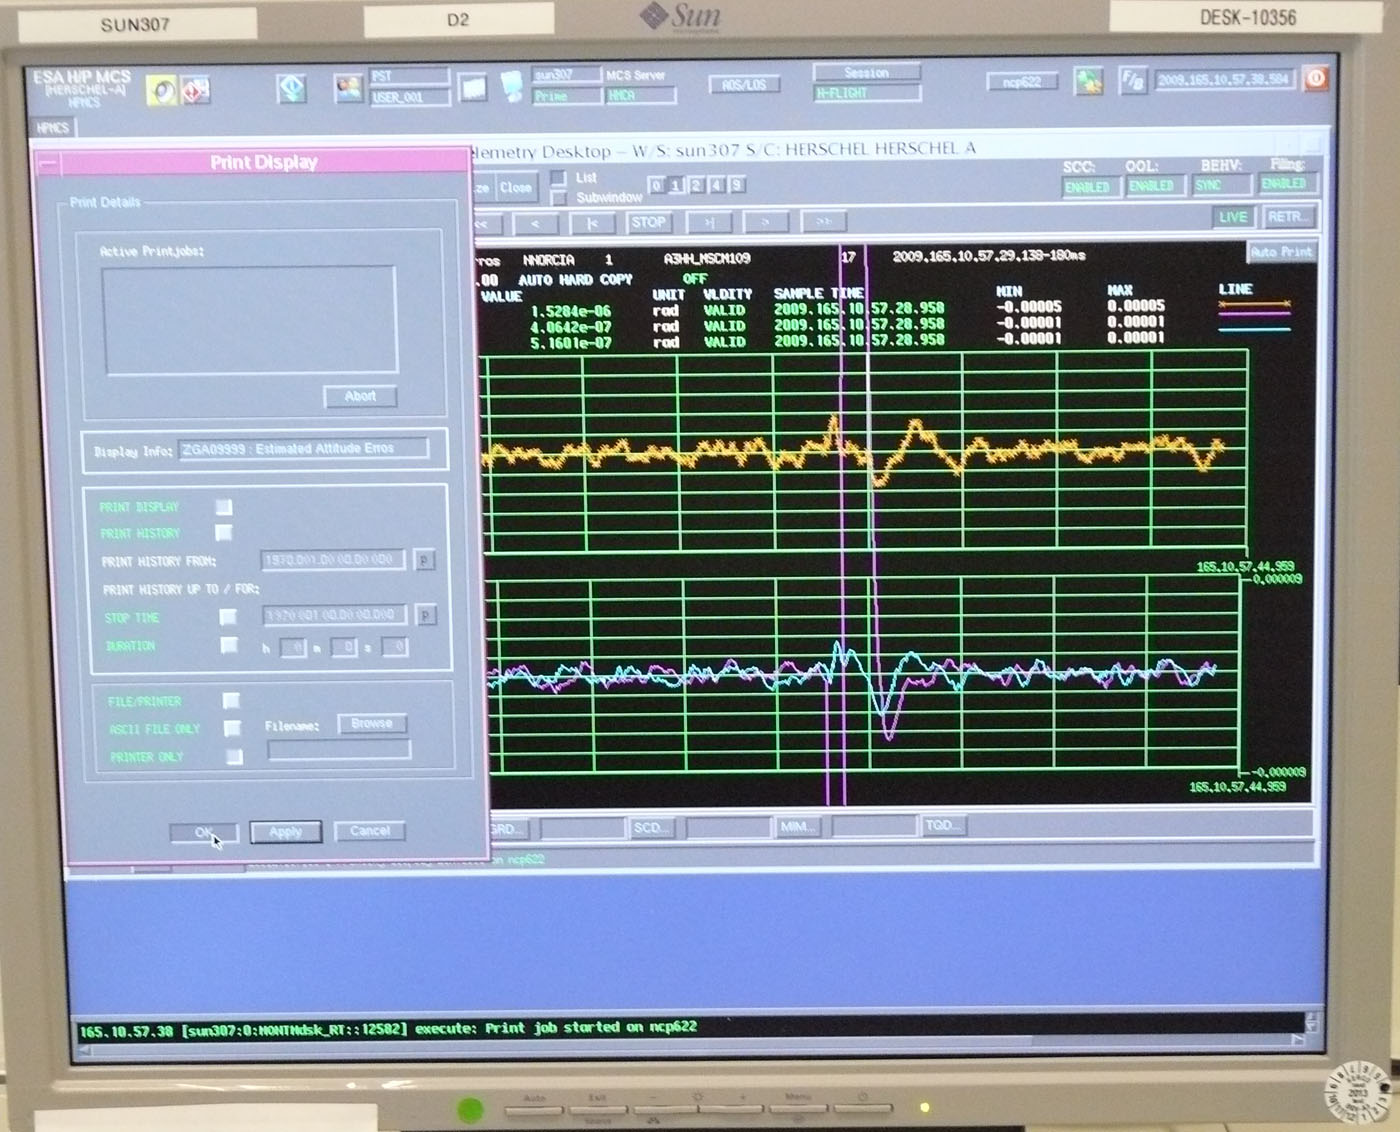 The telemetry received at MOC showing the oscillation in gyro response measured by the current to the gyros as the heavy cryocover swung open and oscillated, causing the entire satellite to wobble slightly until it had reached a stable open position. The large oscillation seen in this gyro signal (marked by the mauve coloured vertical lines on the monitor screen), showing the gyros activating to stabilise the satellite orientation, was the first evidence that the cryocover opening had been carried out successfully. Five or six oscillations occurred before the spacecraft stabilised completely again.